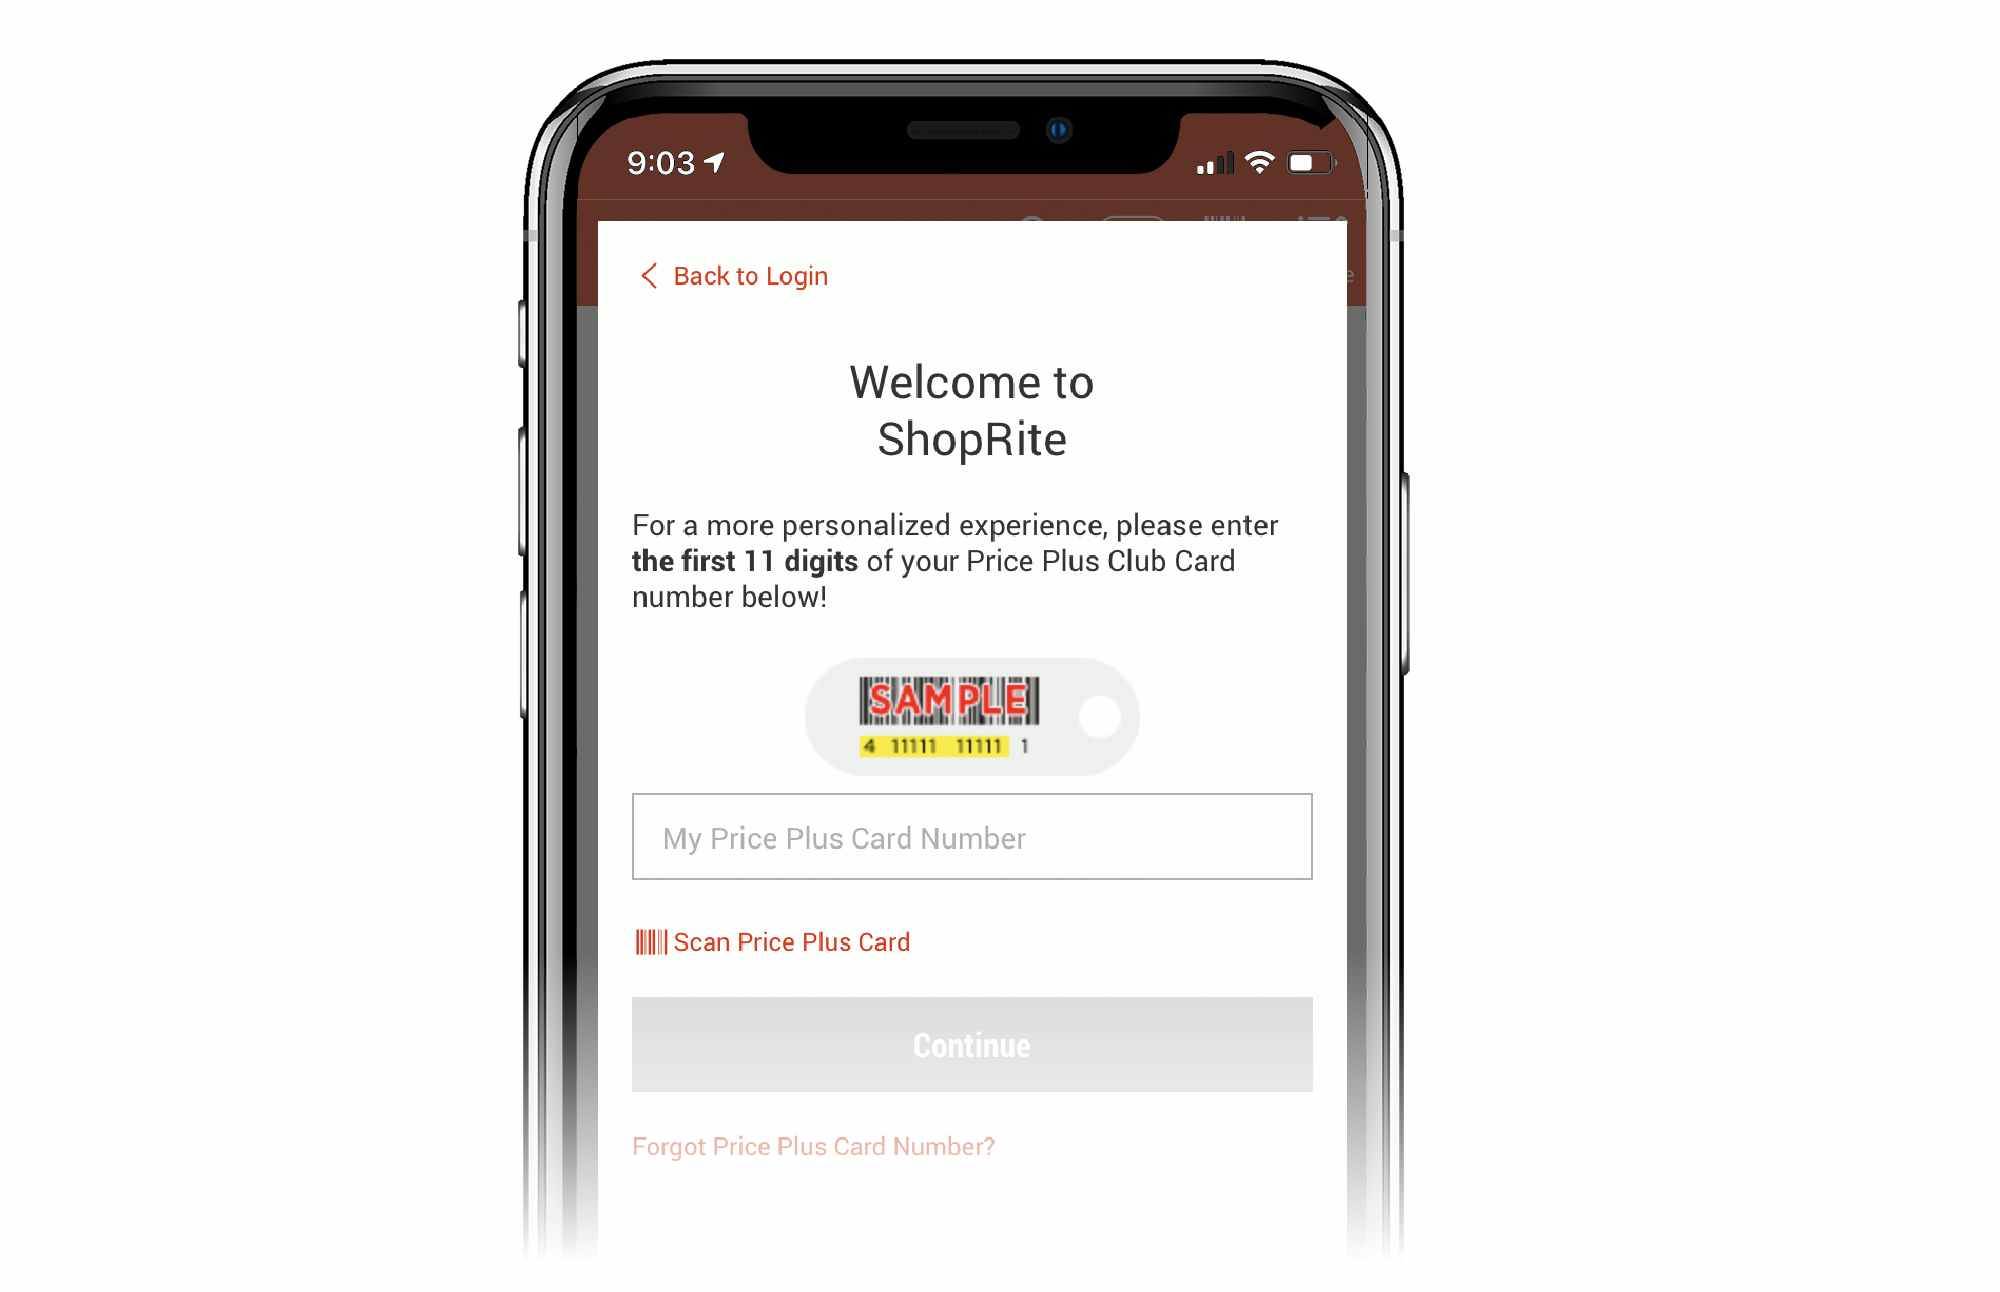 phone screen reads welcome to shoprite and asks users to enter their rewards number